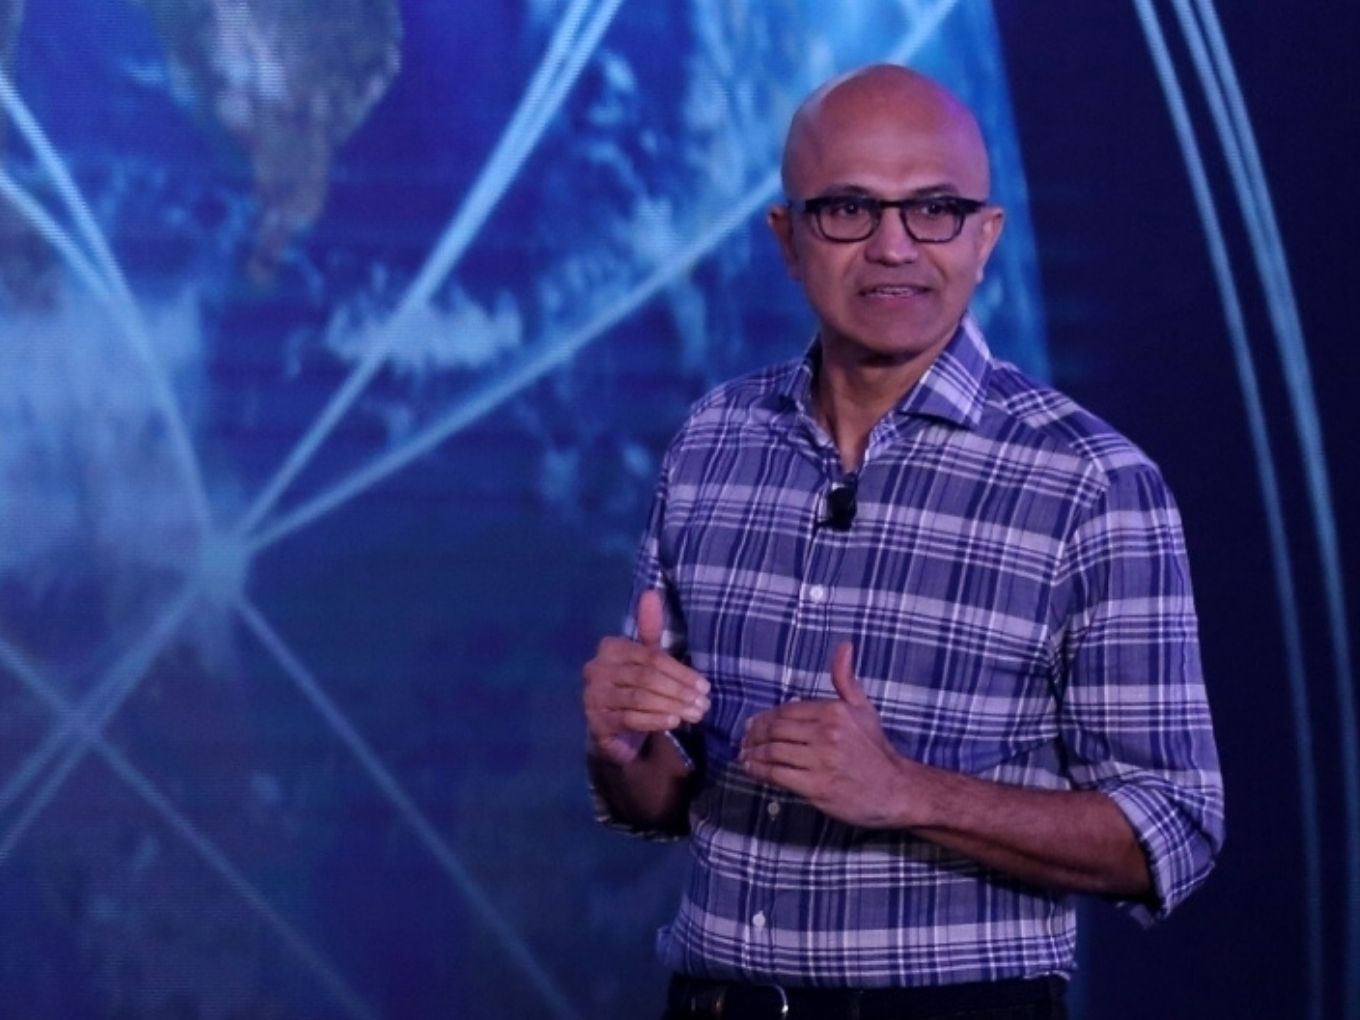 Satya Nadella in India - 50 Bn Connected Devices And India At The Centre: Microsoft CEO Satya Nadella’s Vision For The Future